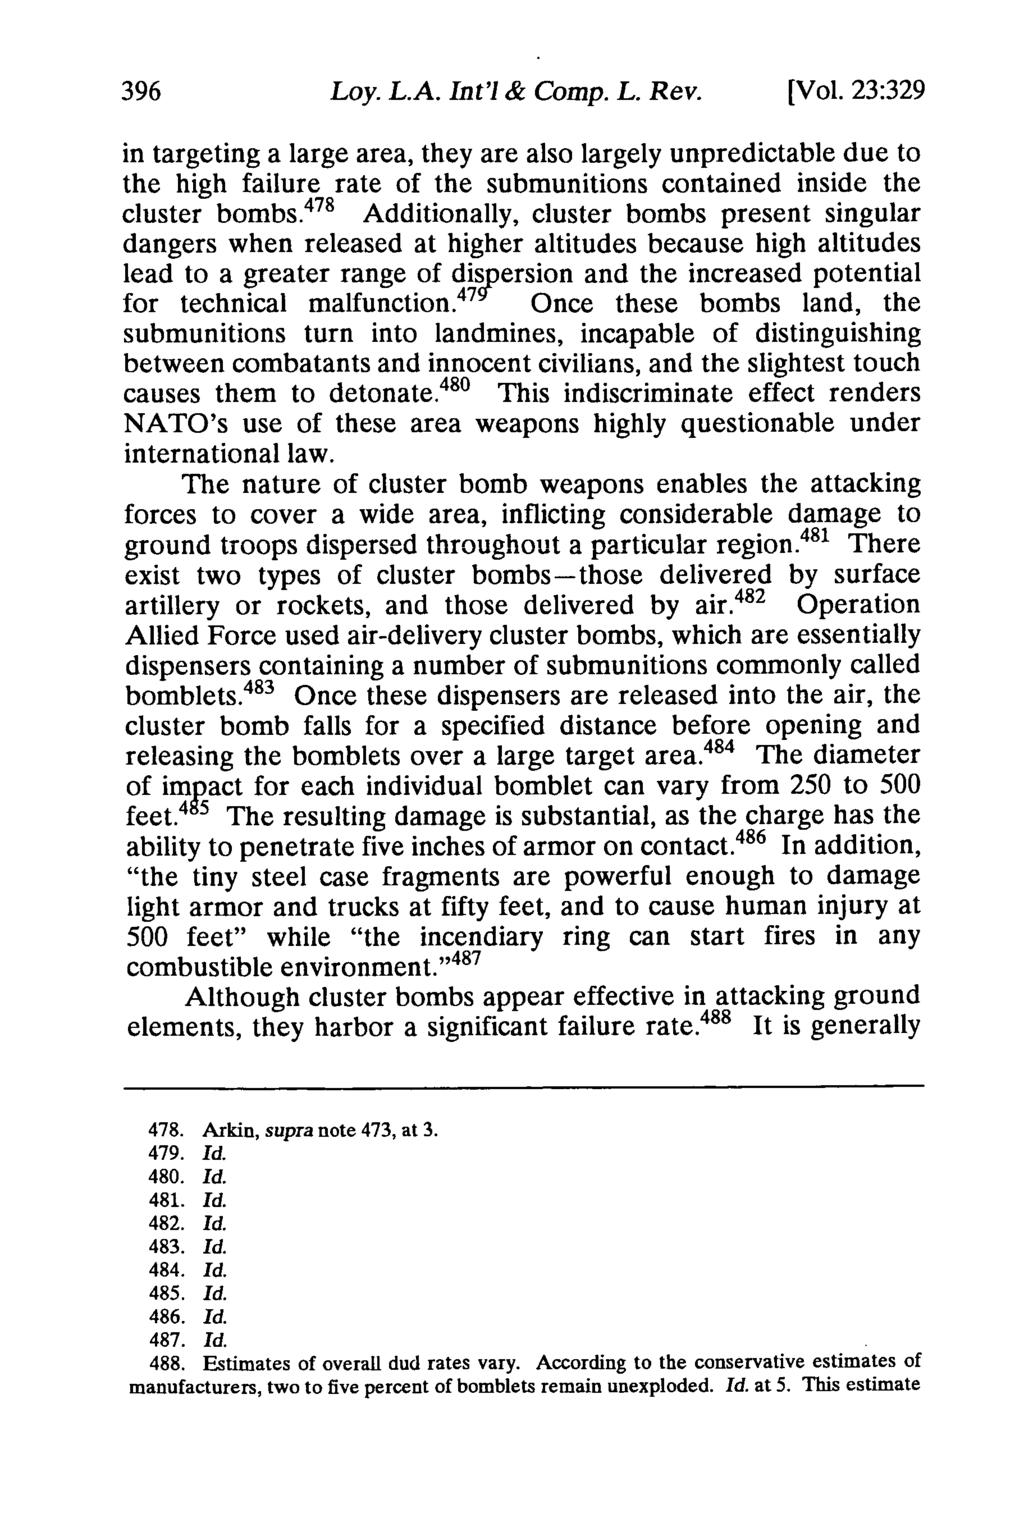 Loy. L.A. Int'l & Comp. L. Rev. [Vol. 23:329 in targeting a large area, they are also largely unpredictable due to the high failure rate of the submunitions contained inside the cluster bombs.